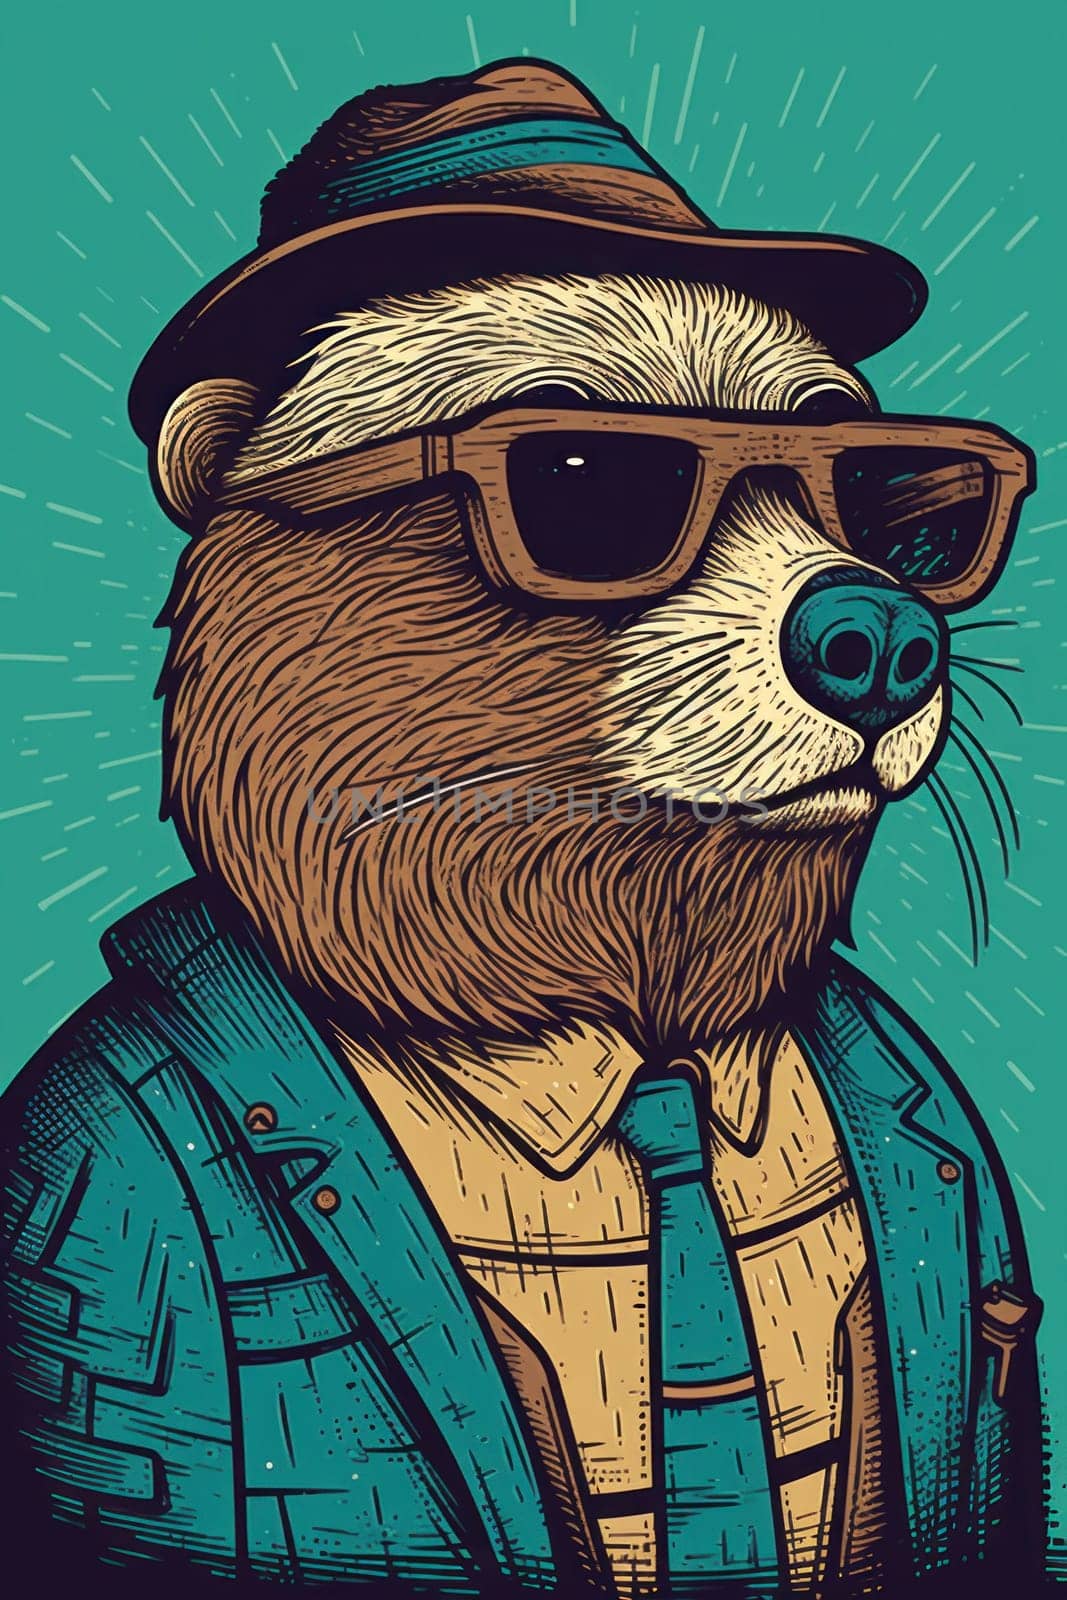 A drawing of a raccoon wearing sunglasses and a hat